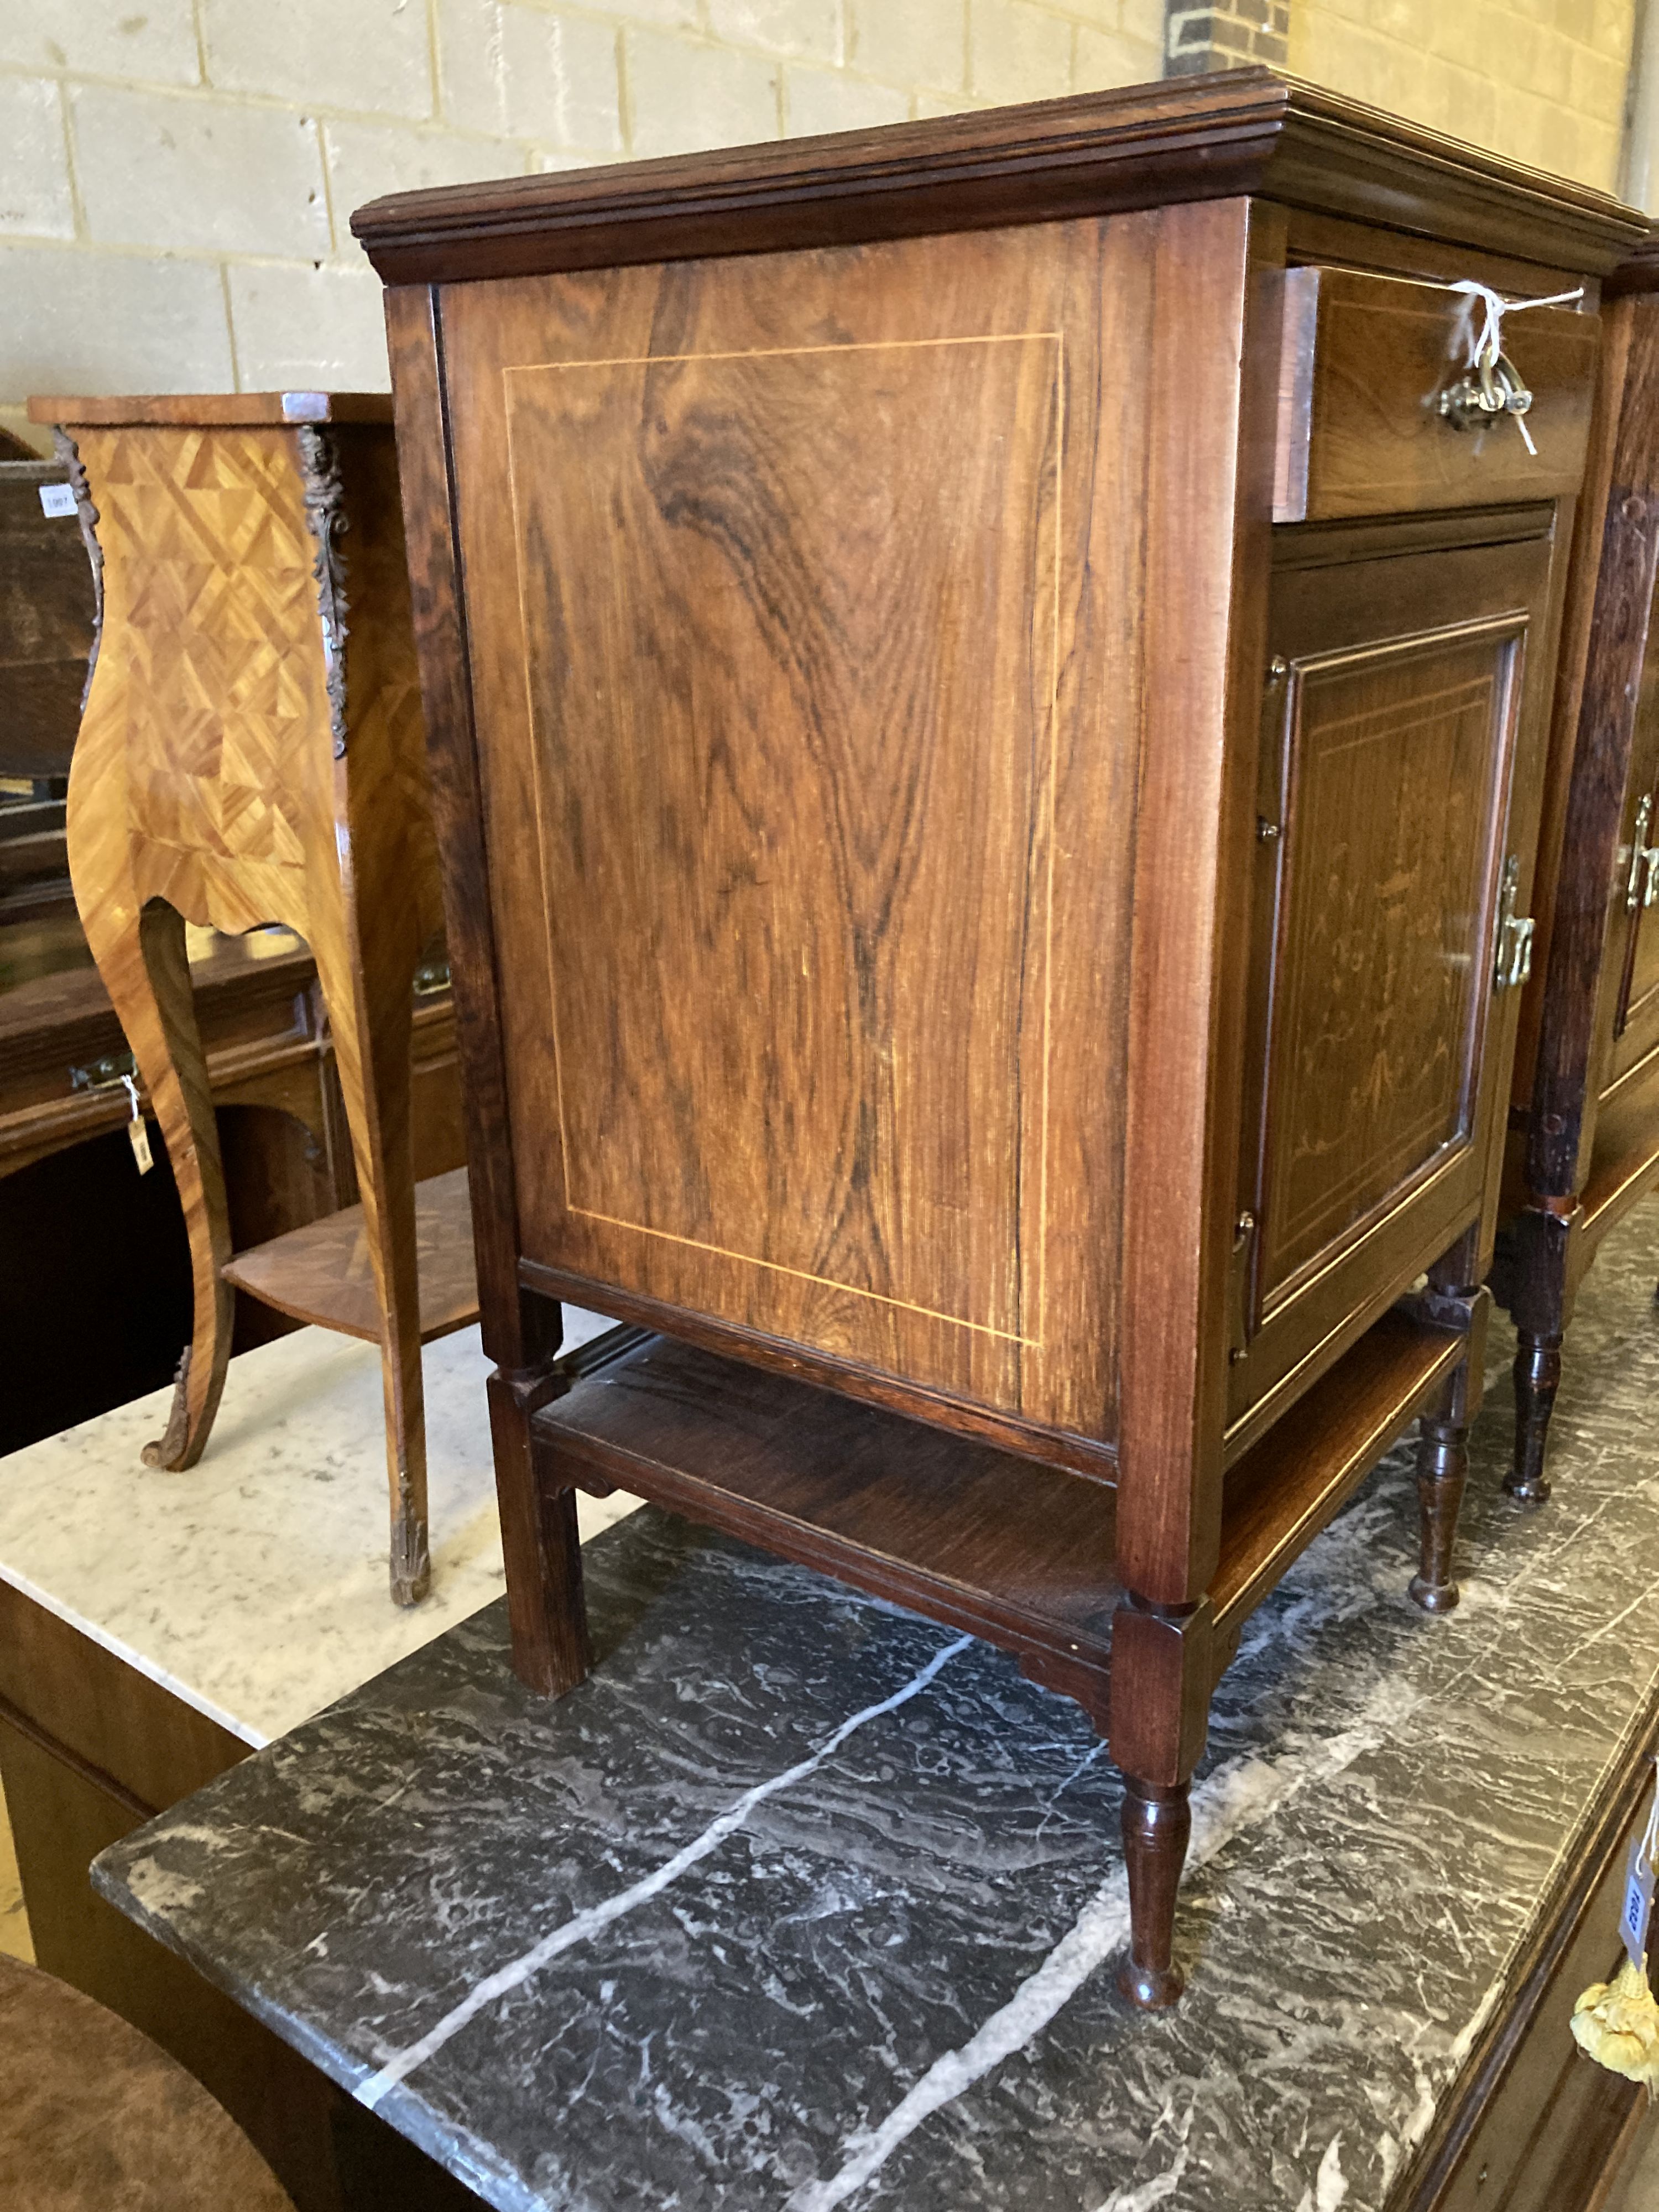 A pair of Edwardian marquetry inlaid rosewood bedside cupboards, width 39cm, depth 38cm, height 69cm